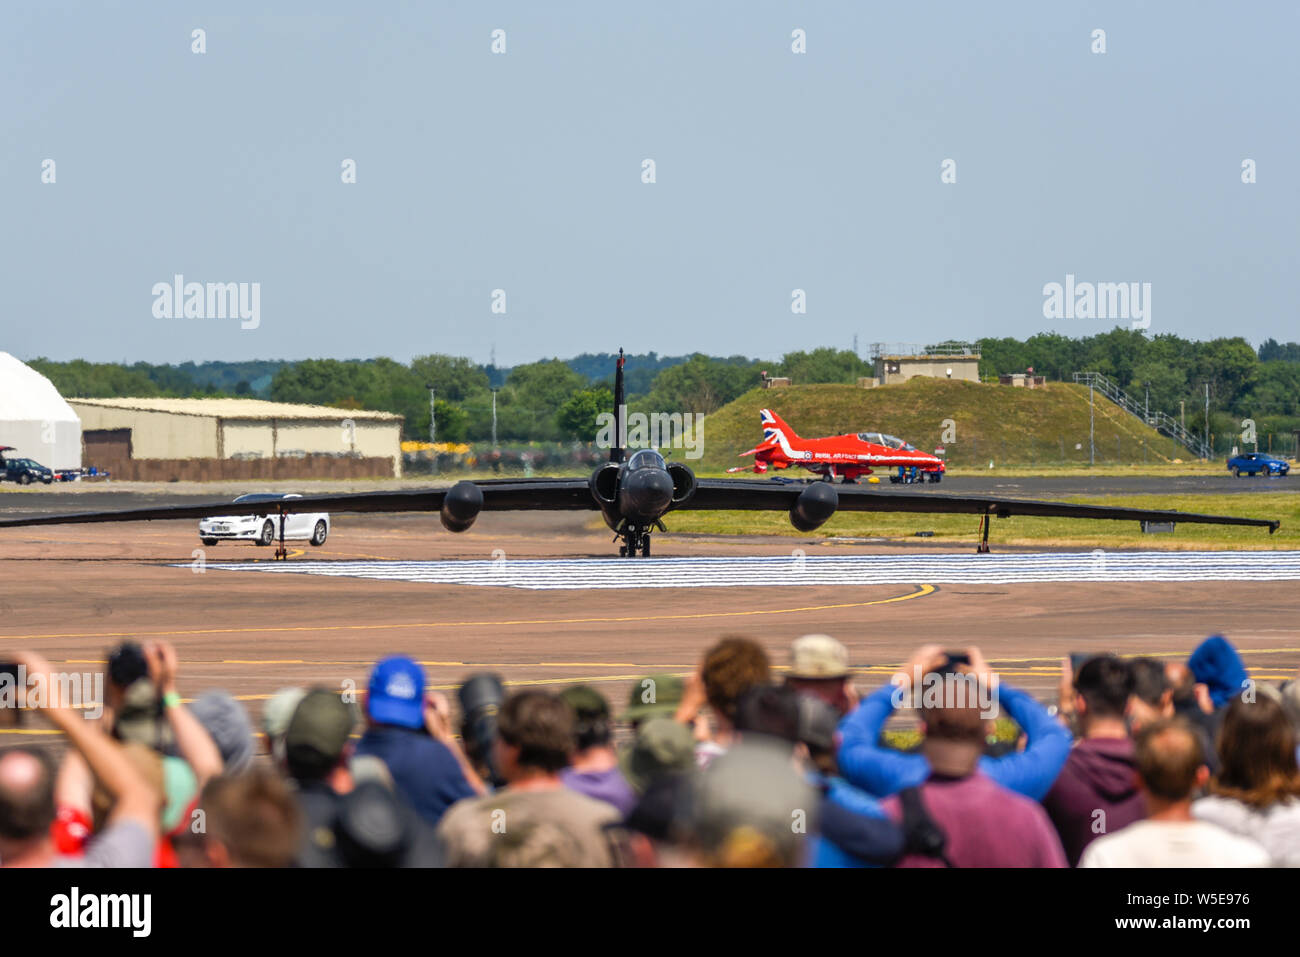 Lockheed U-2 Dragon Lady spyplane about to take off from RAF Fairford during Royal International Air Tattoo, RIAT, with crowds people watching Stock Photo